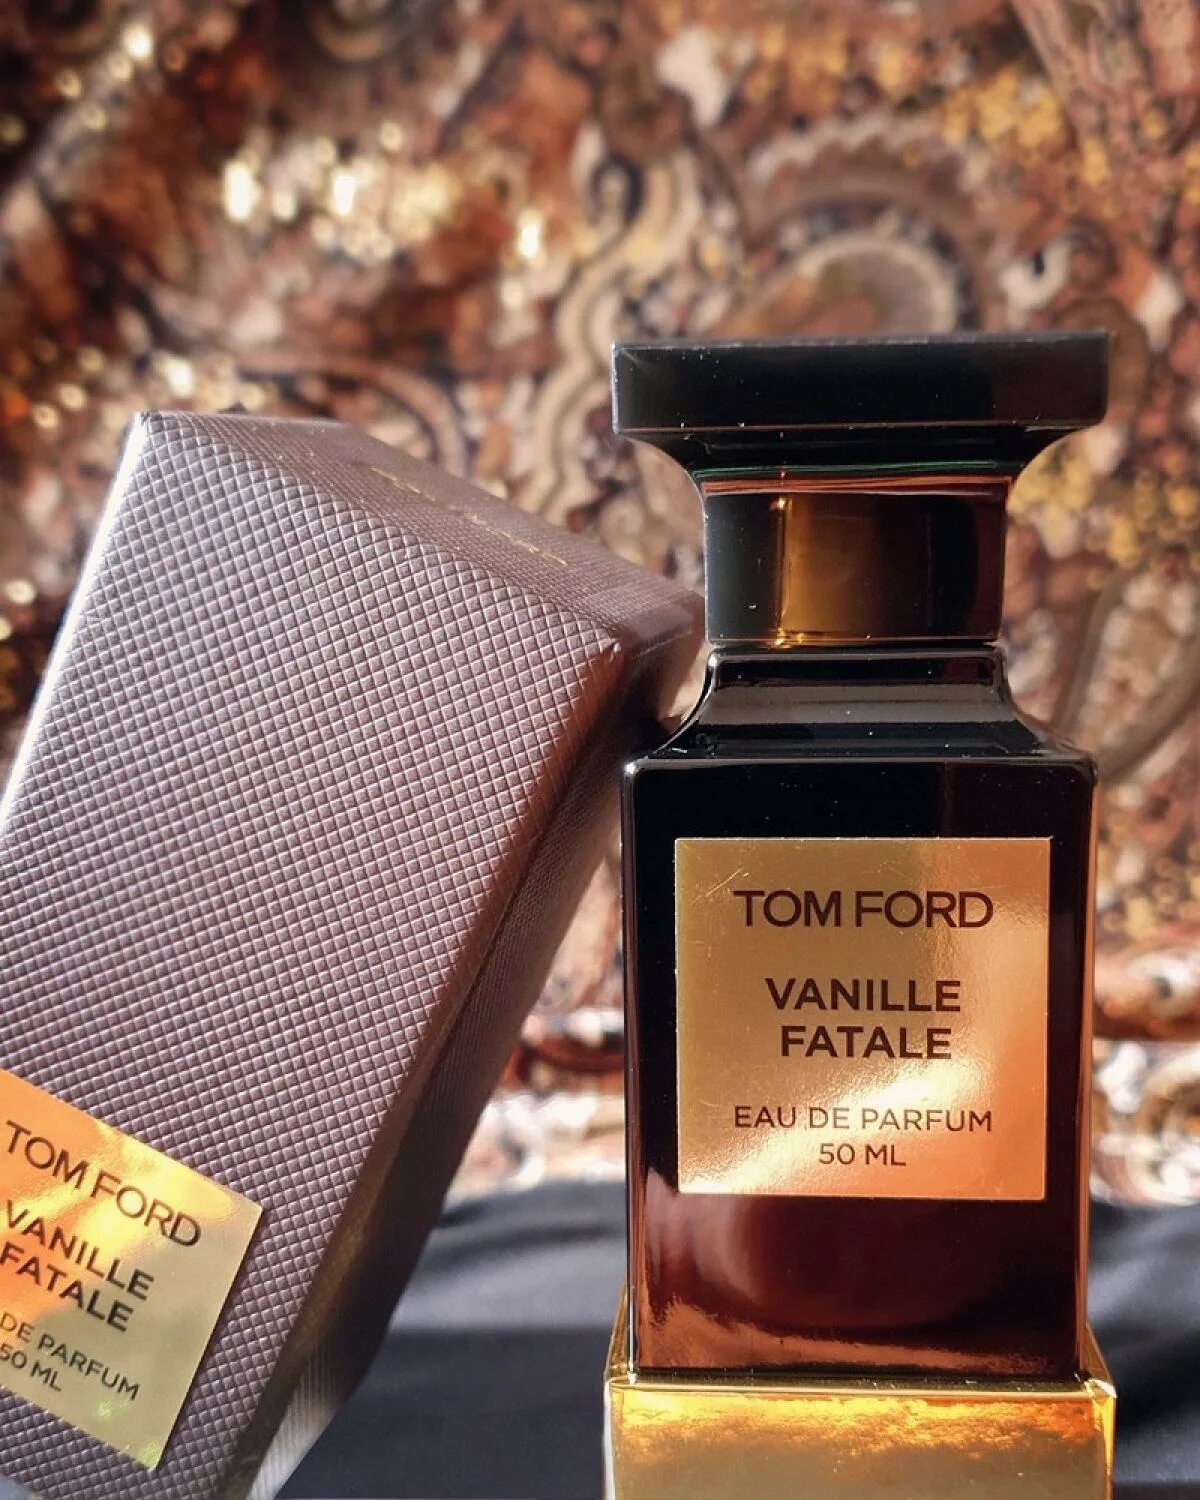 Tom Ford Vanille Fatale. Духи Tom Ford Vanille Fatale. Том Форд ваниль Фаталь. Tom Ford Tobacco Vanille.